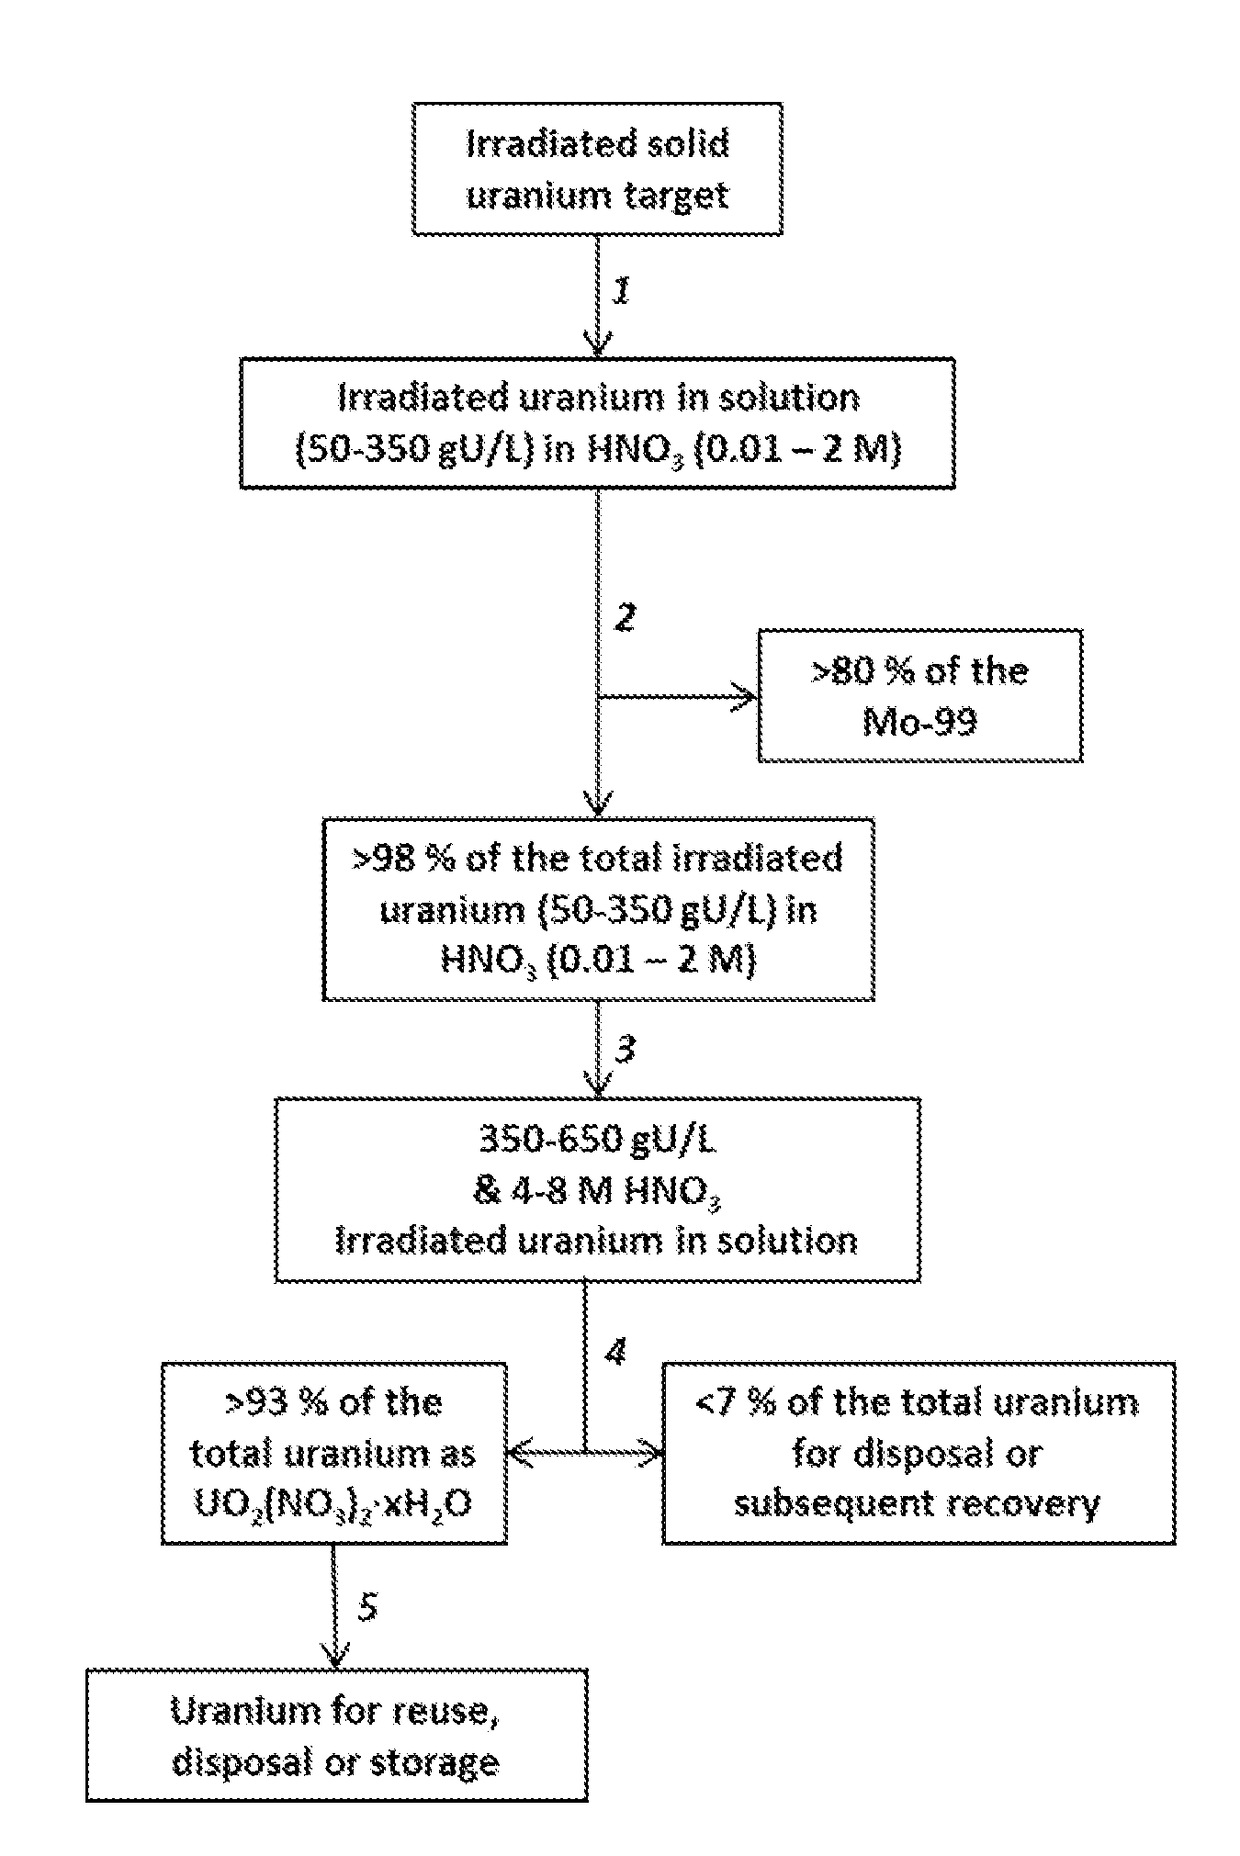 Recovery of uranium from an irradiated solid target after removal of molybdenum-99 produced from the irradiated target